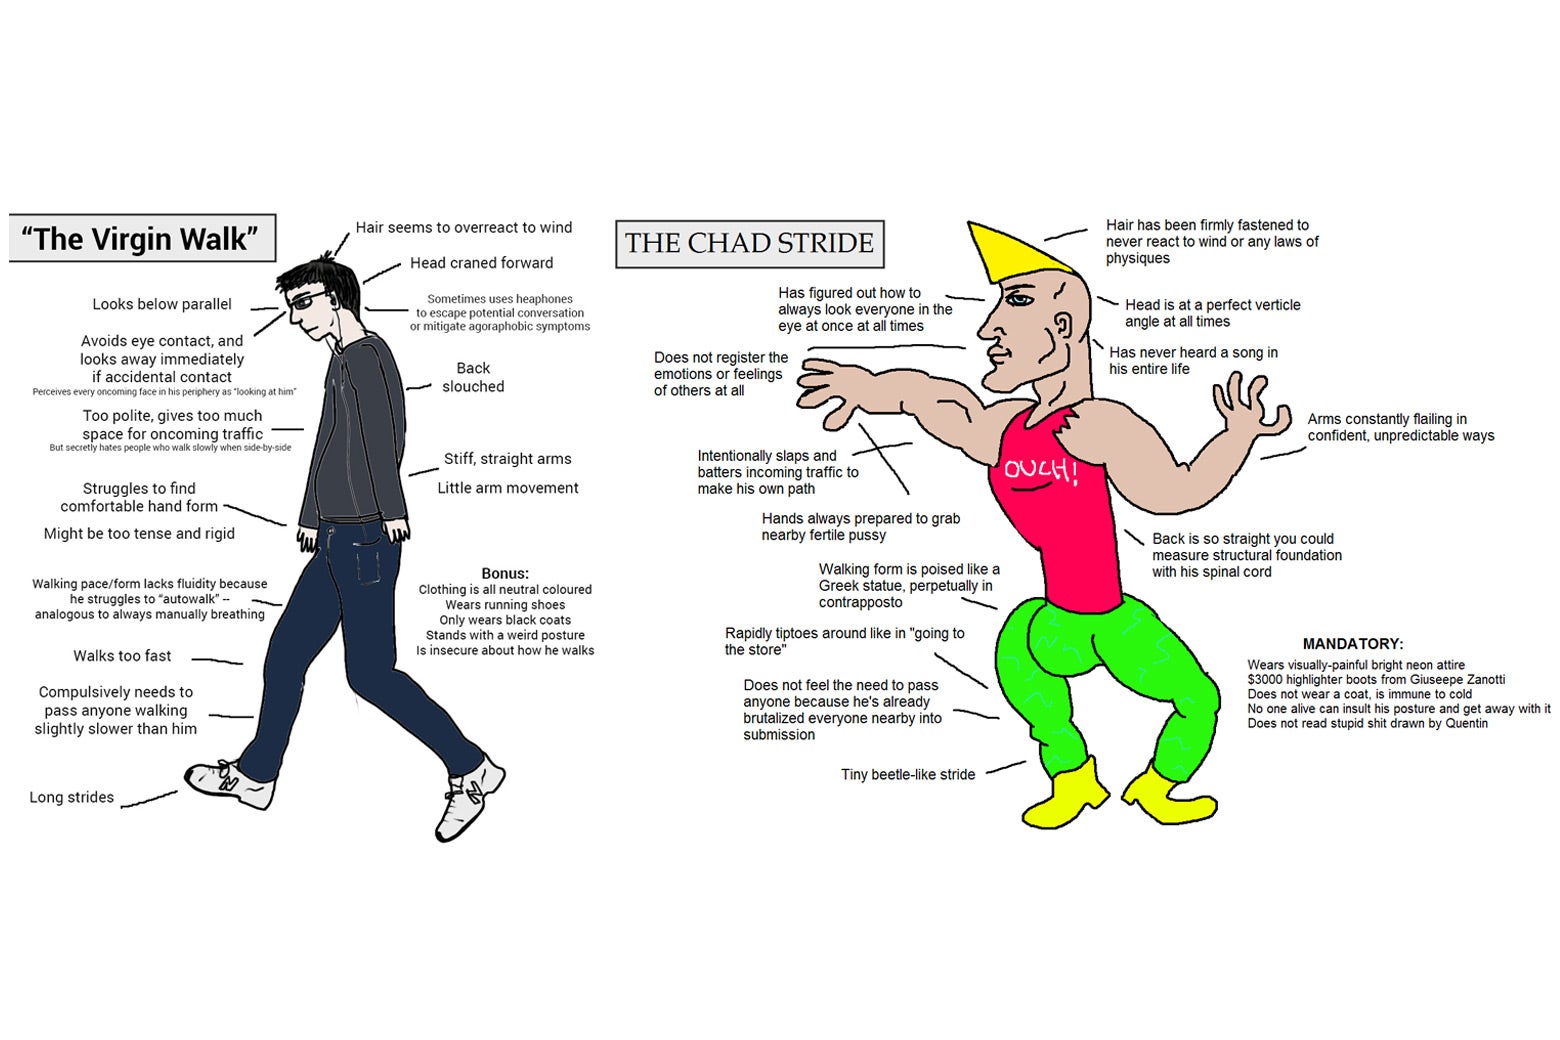 Incel meme depicting a virgin and a Chad